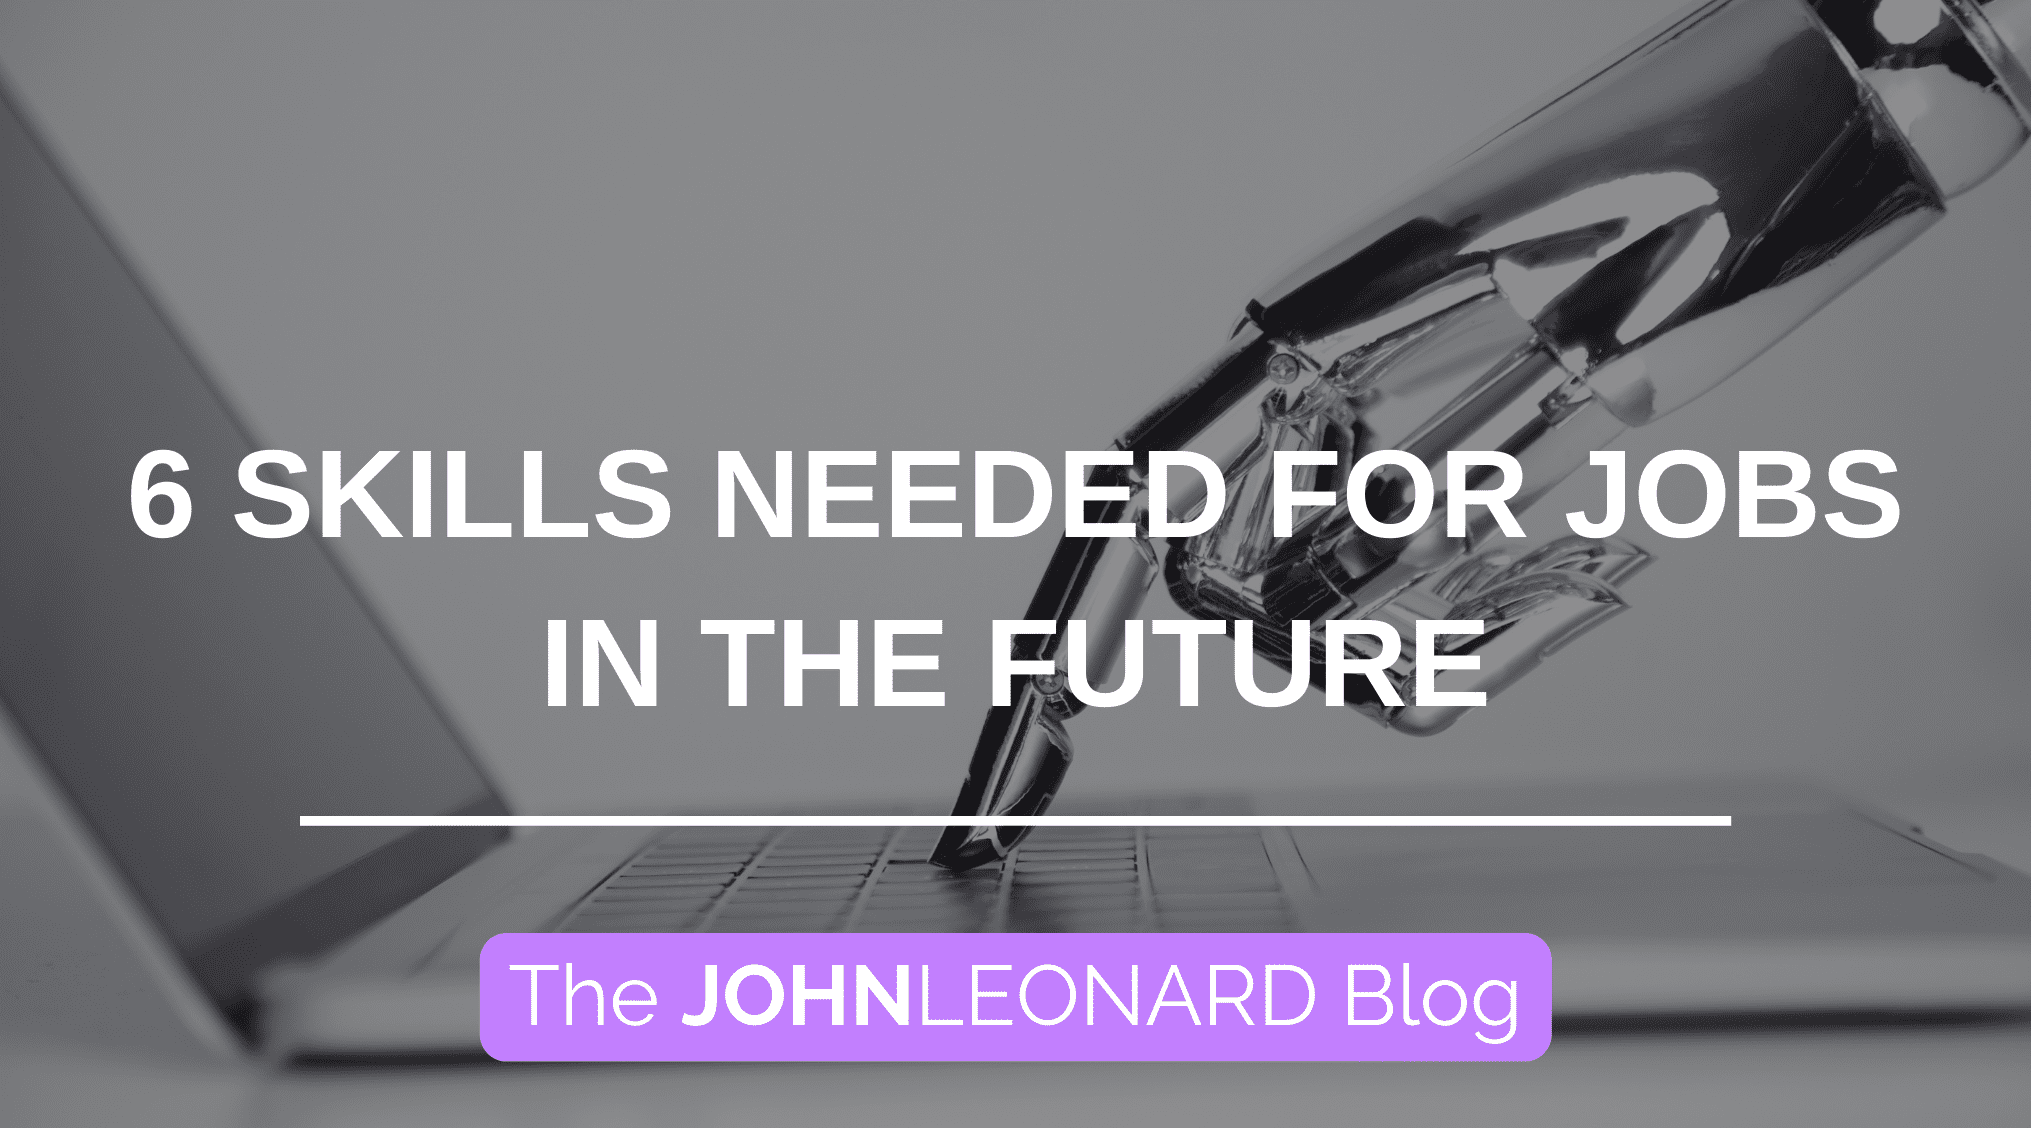 6 Skills Needed for Jobs in the Future